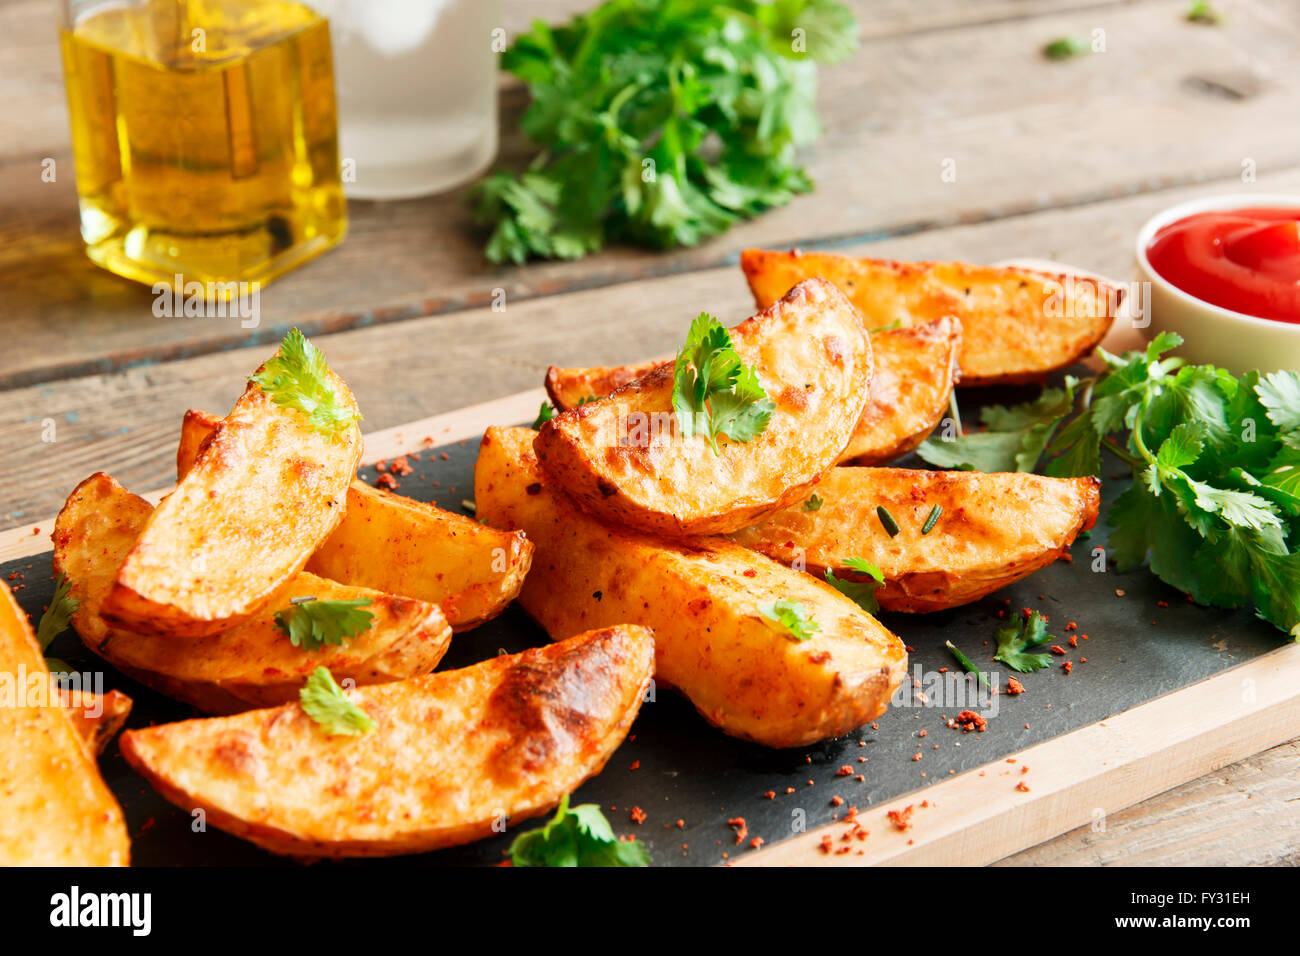 baked roasted potato wedges with herbs Stock Photo